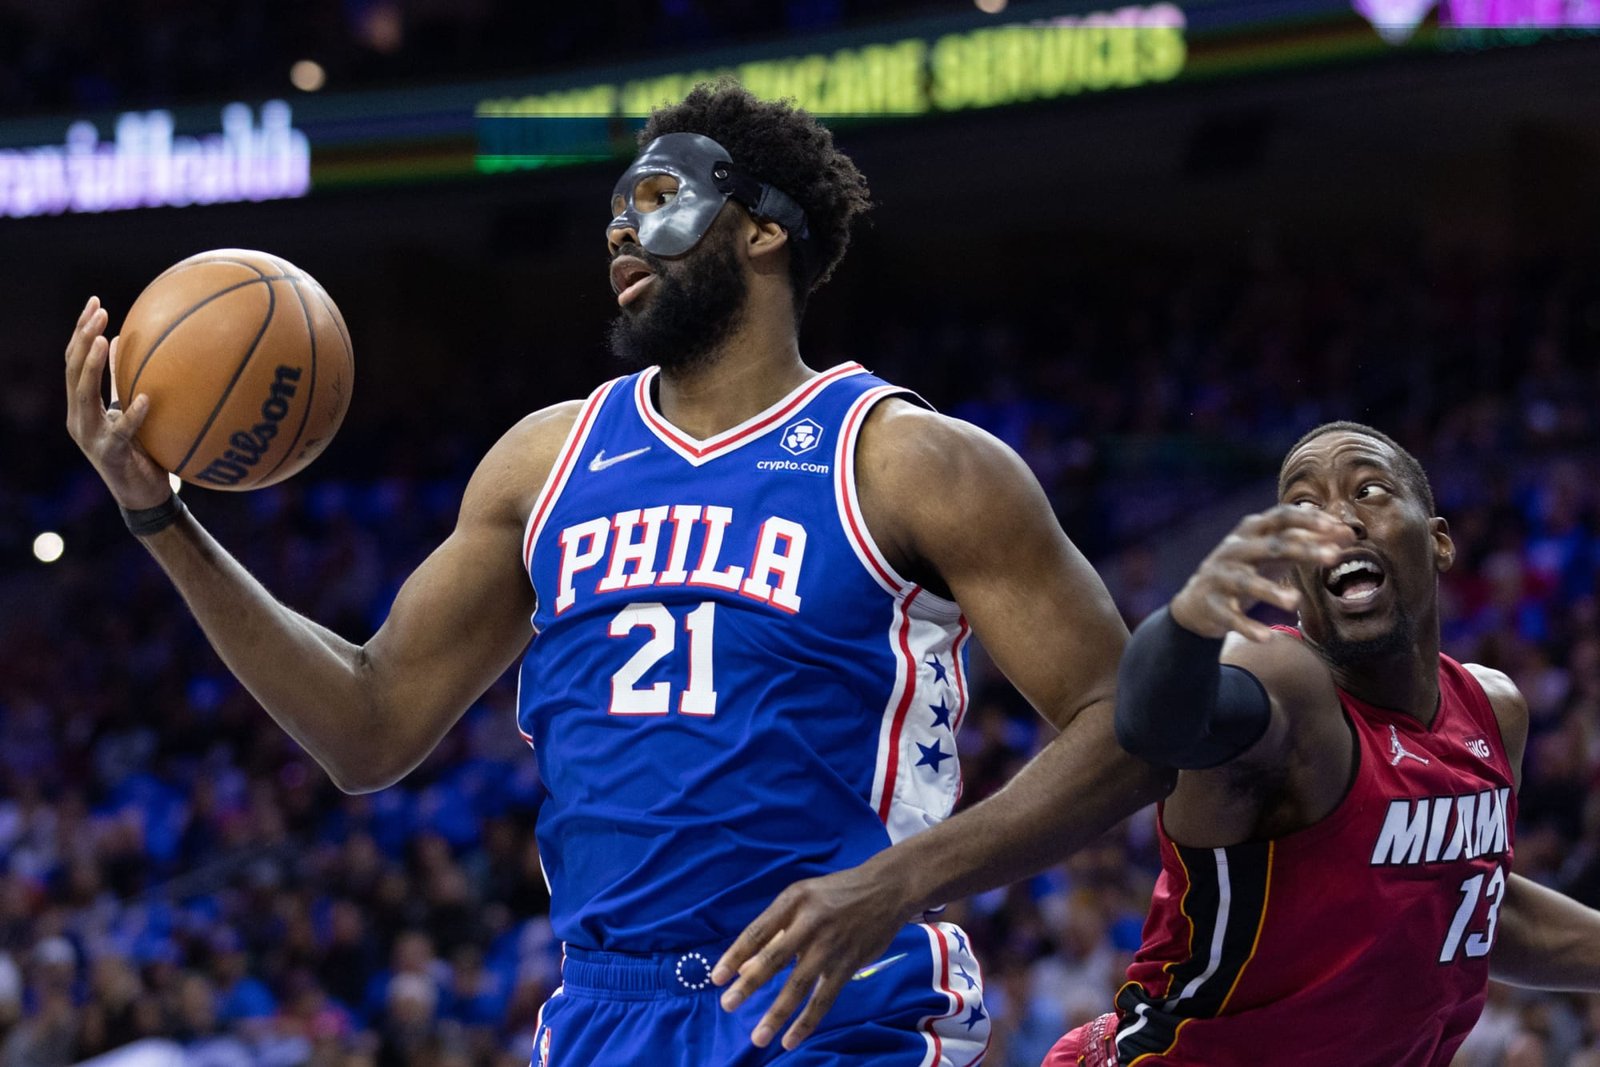 Heat fans starting to worry after losing Game 3 in Joel Embiid’s return